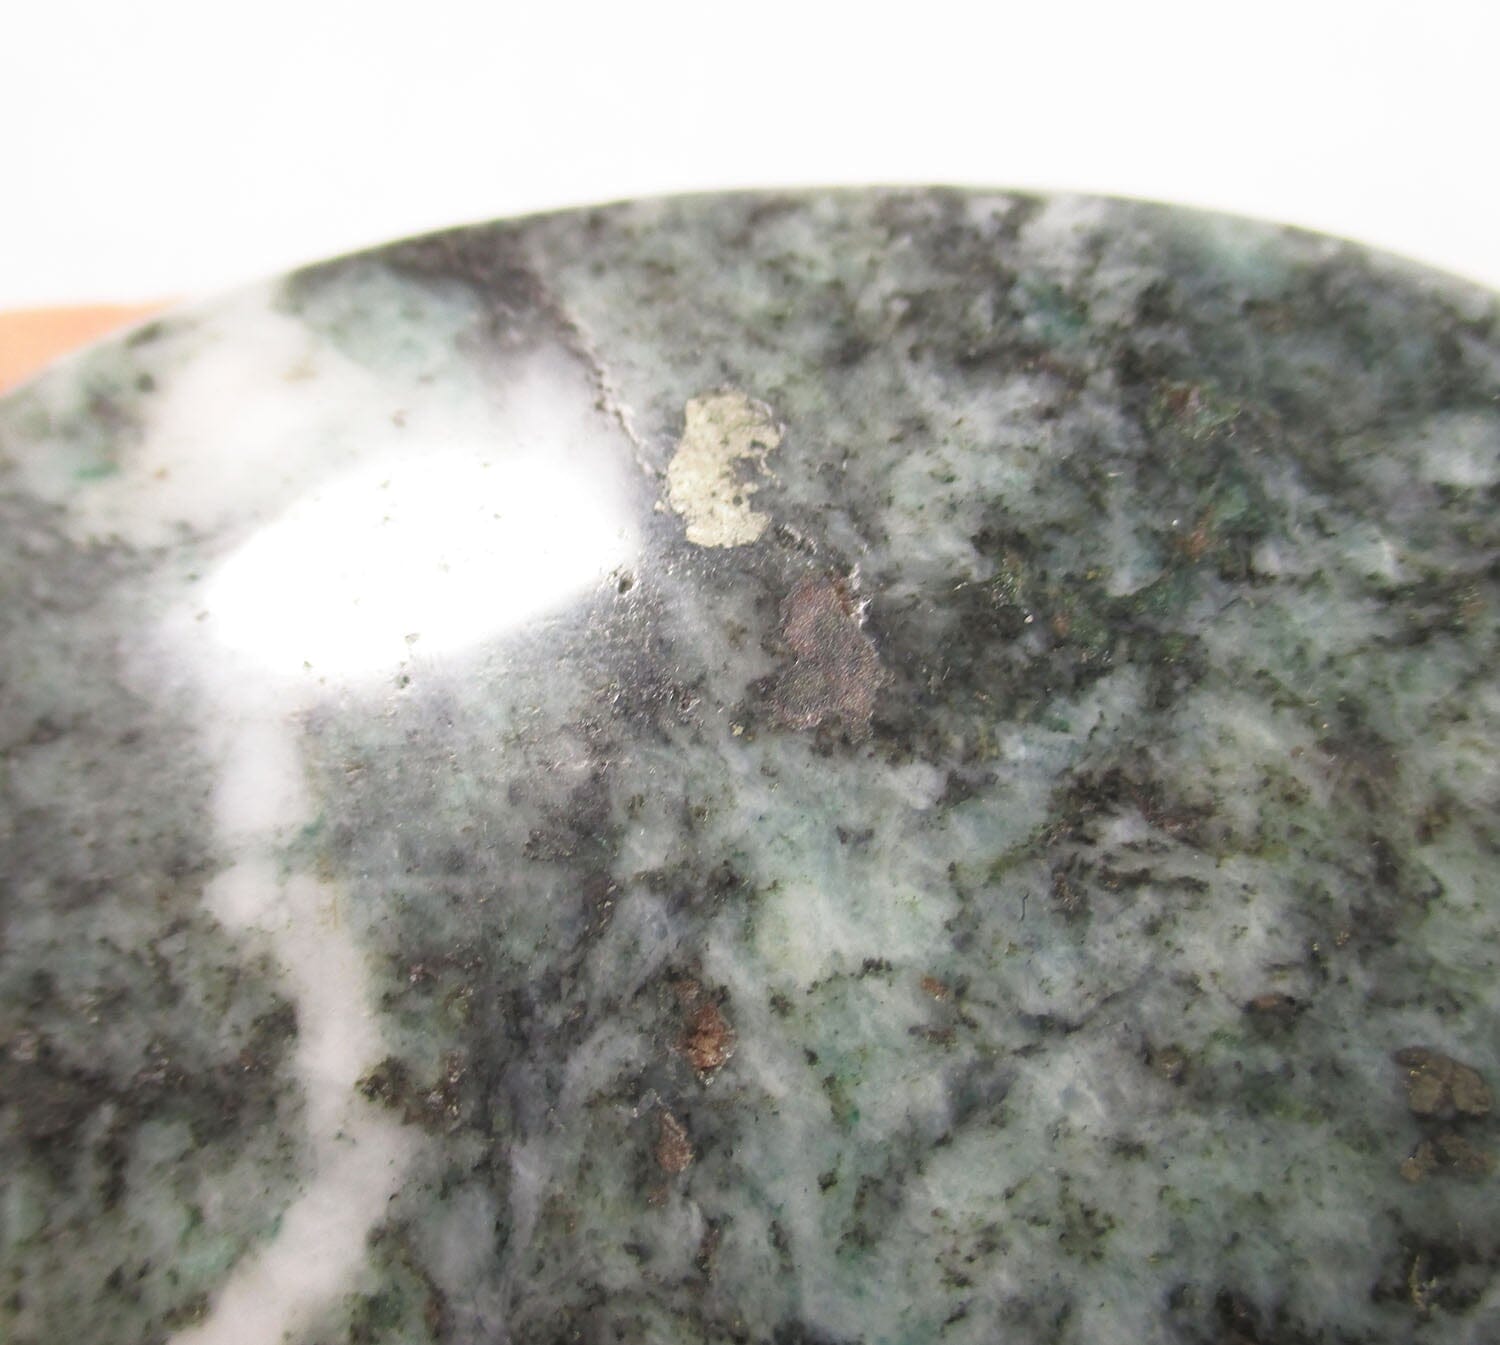 African Jade Palm Stone - Cut & Polished Crystals > Polished Crystal Palm Stones